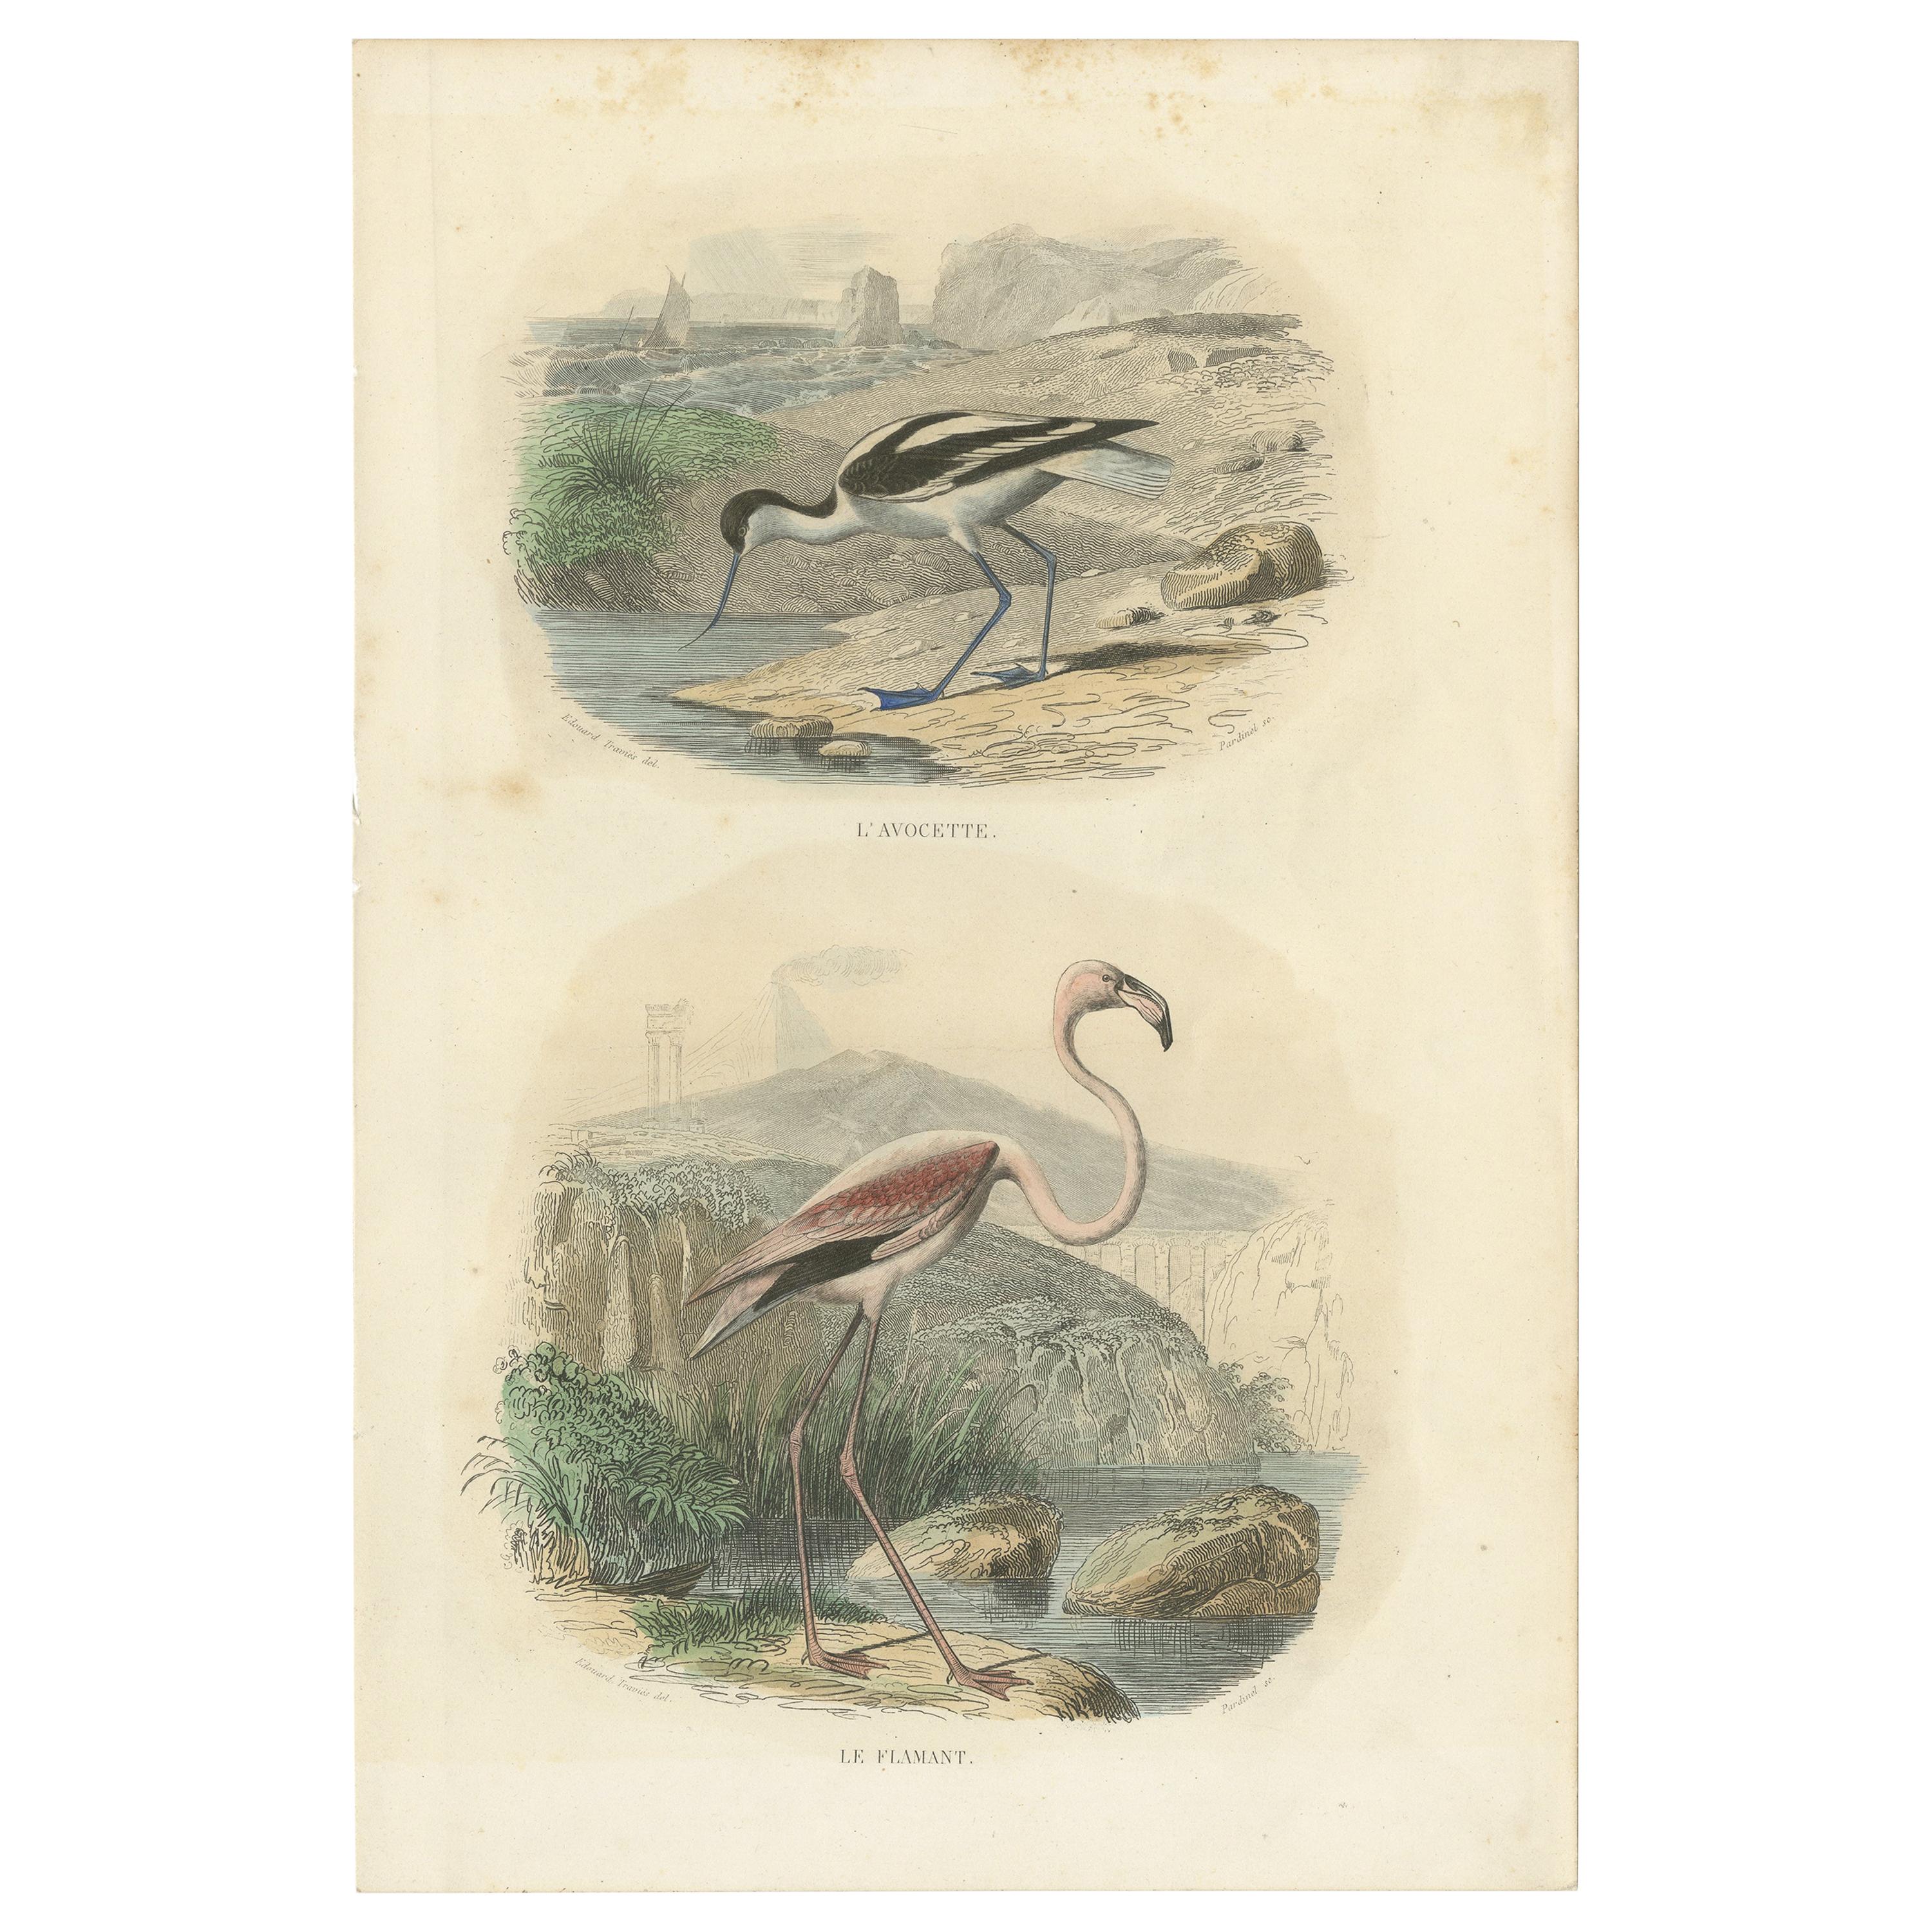 Antique Bird Print of the Pied Avocet and Greater Flamingo by Richard '1837'